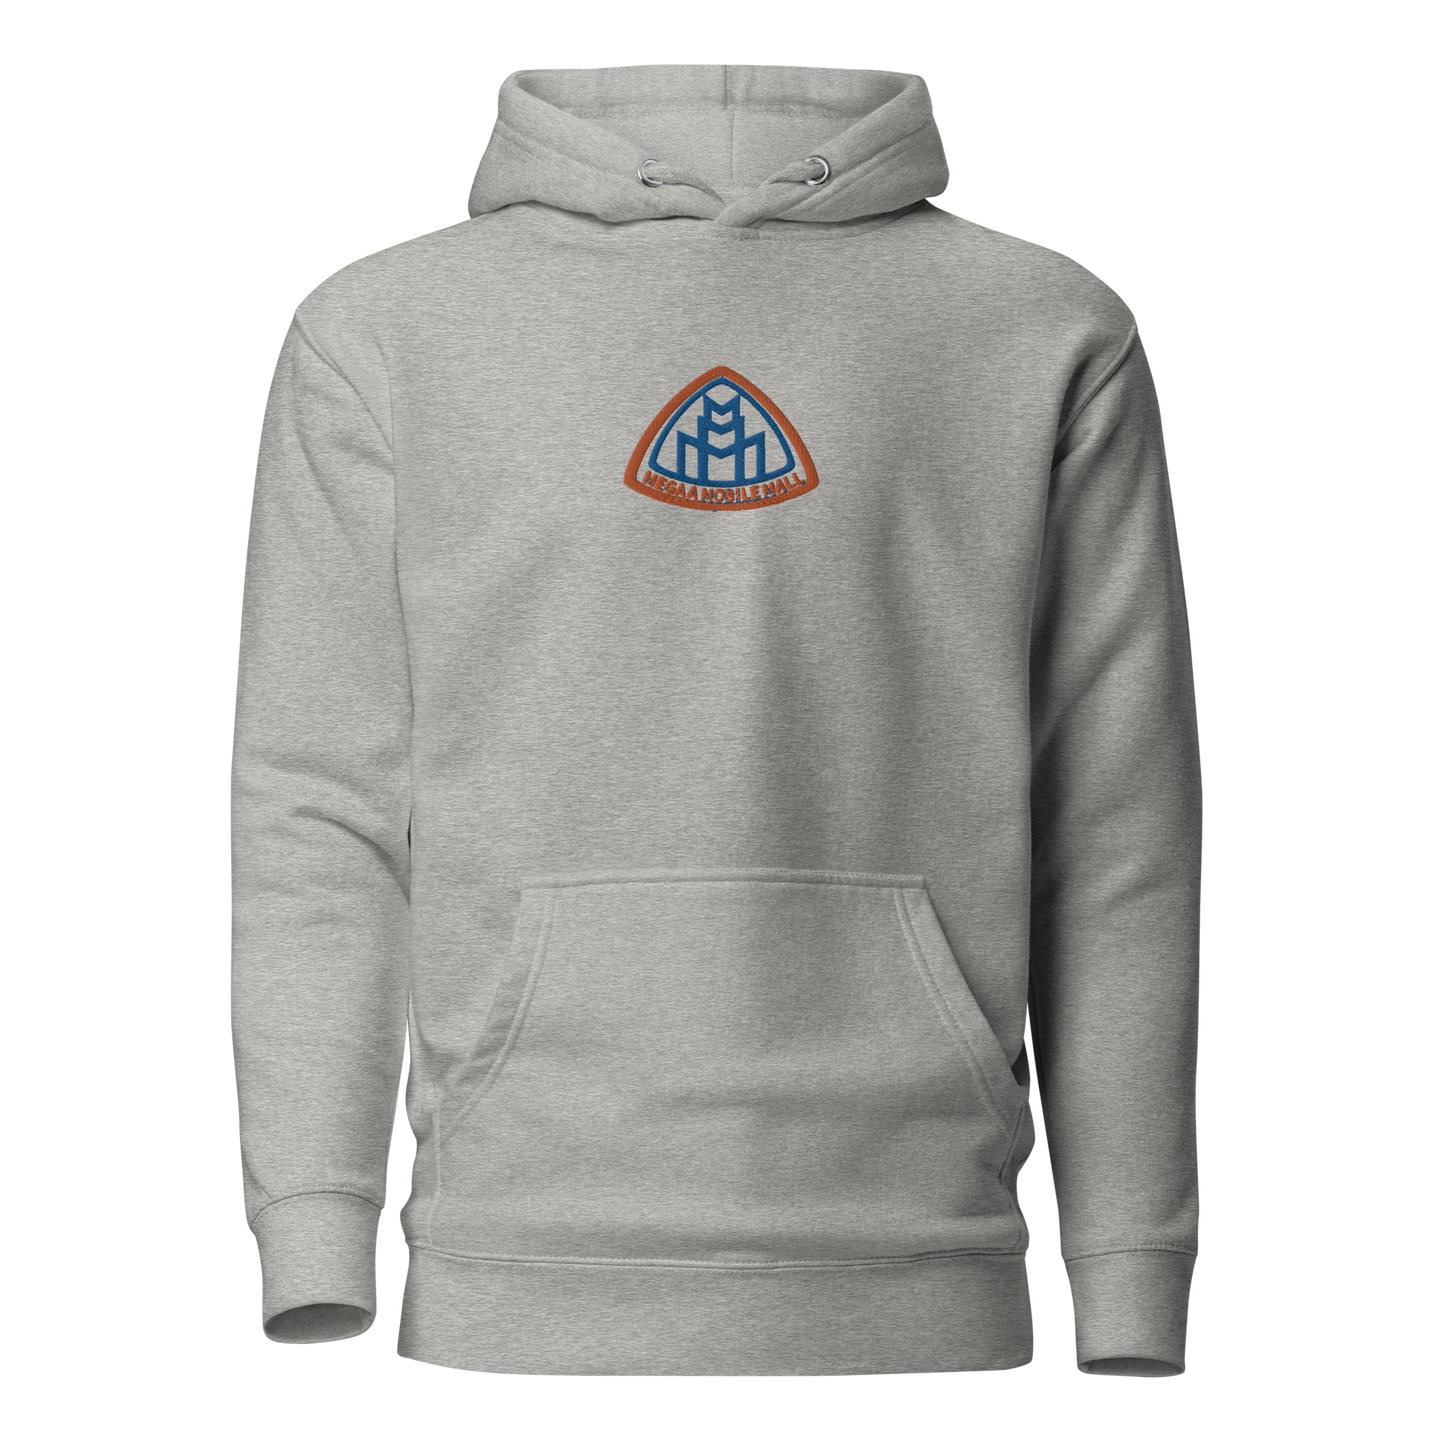 new york colorway megaamobilemall logo stitched gray hoodie